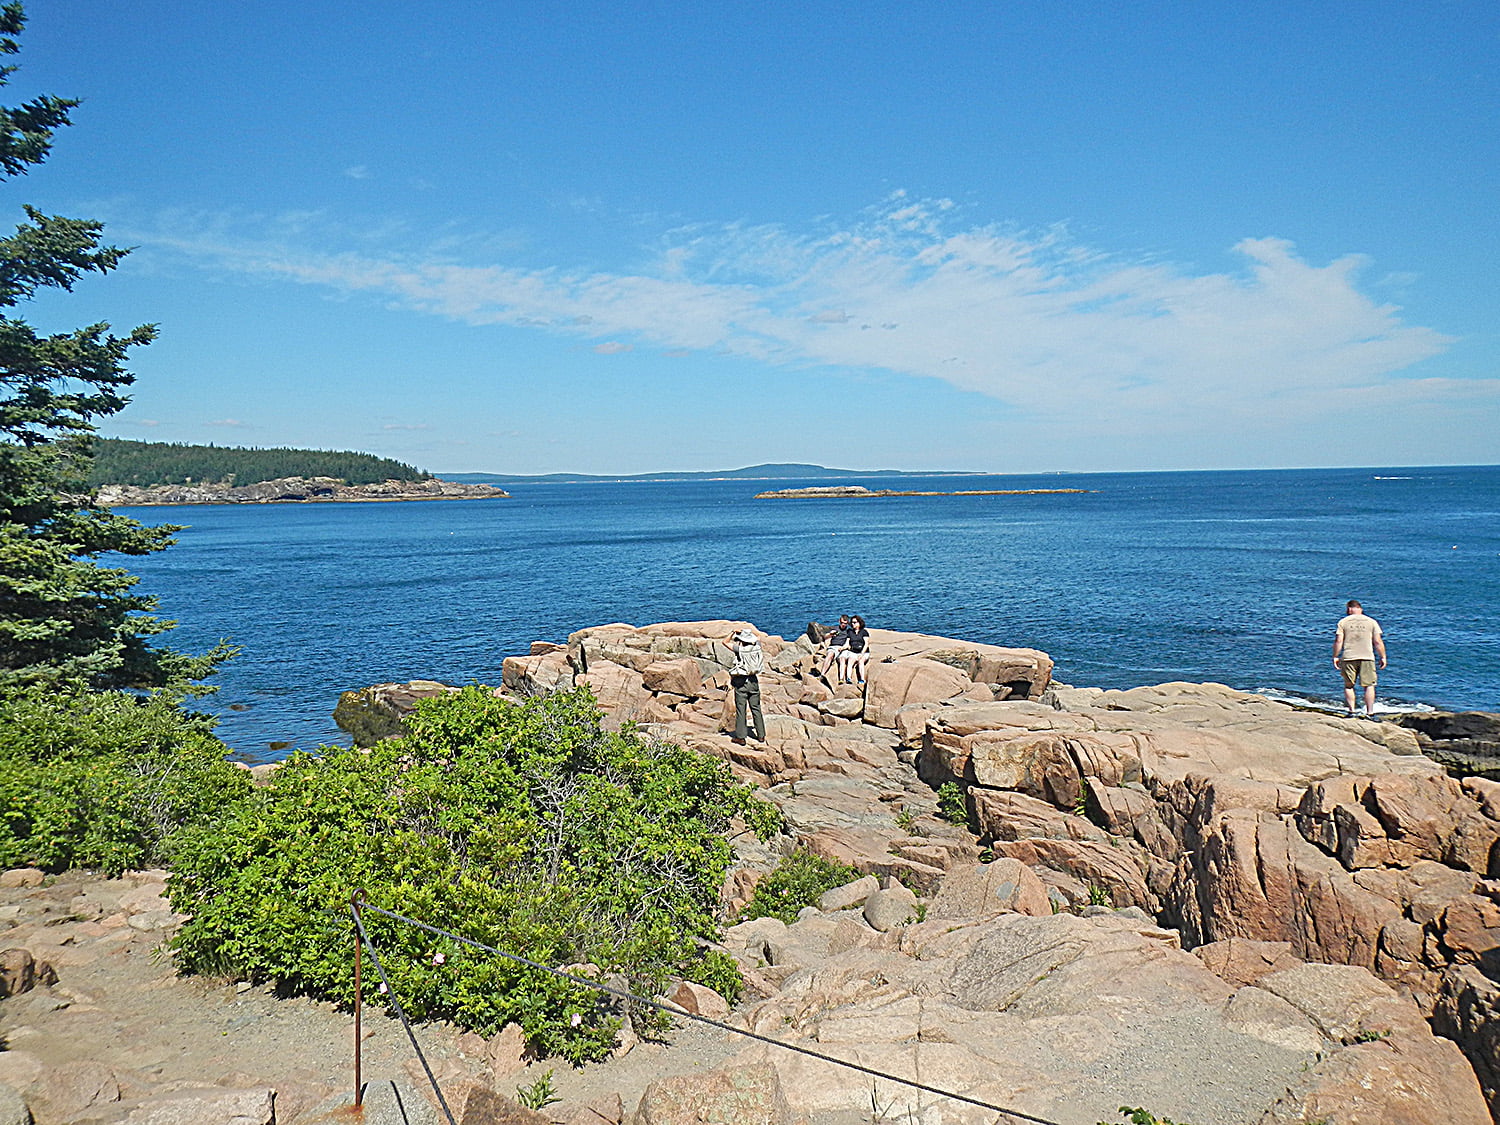 People taking pictures at Thunder Hole in Acadia Park, a popular lookout point in Maine.  